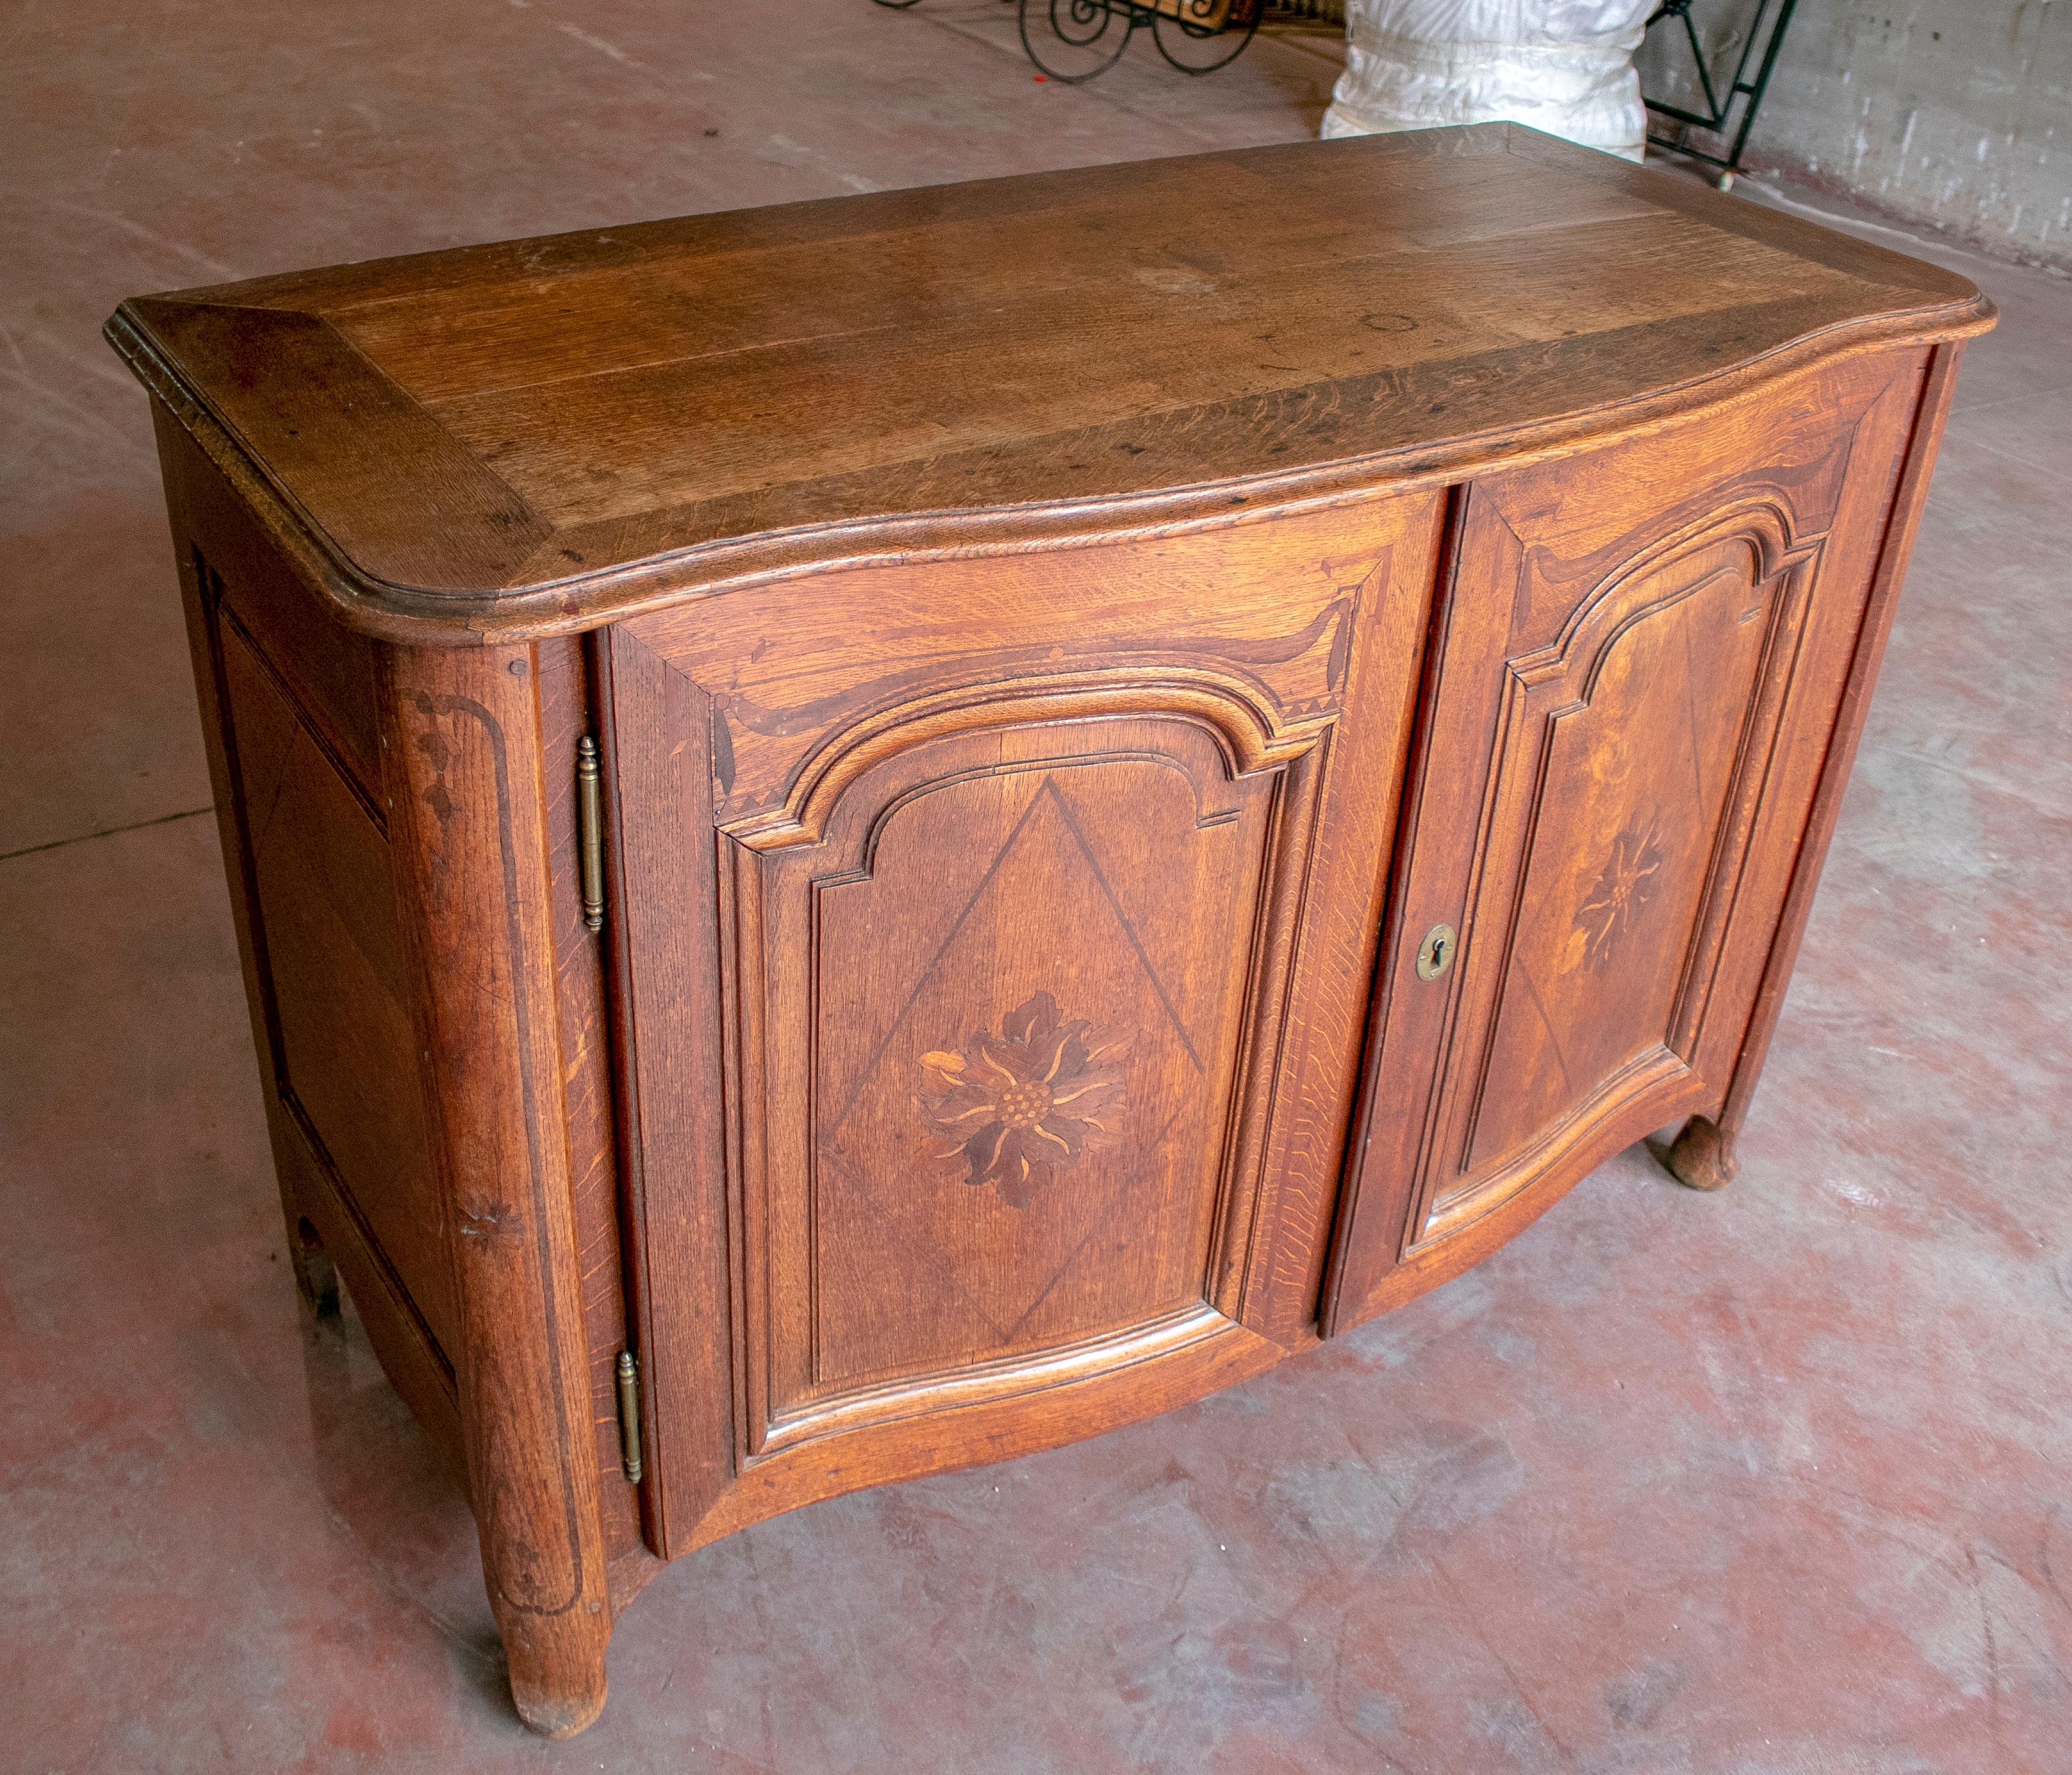 19th century French oak two-door chest with satinwood inlay.